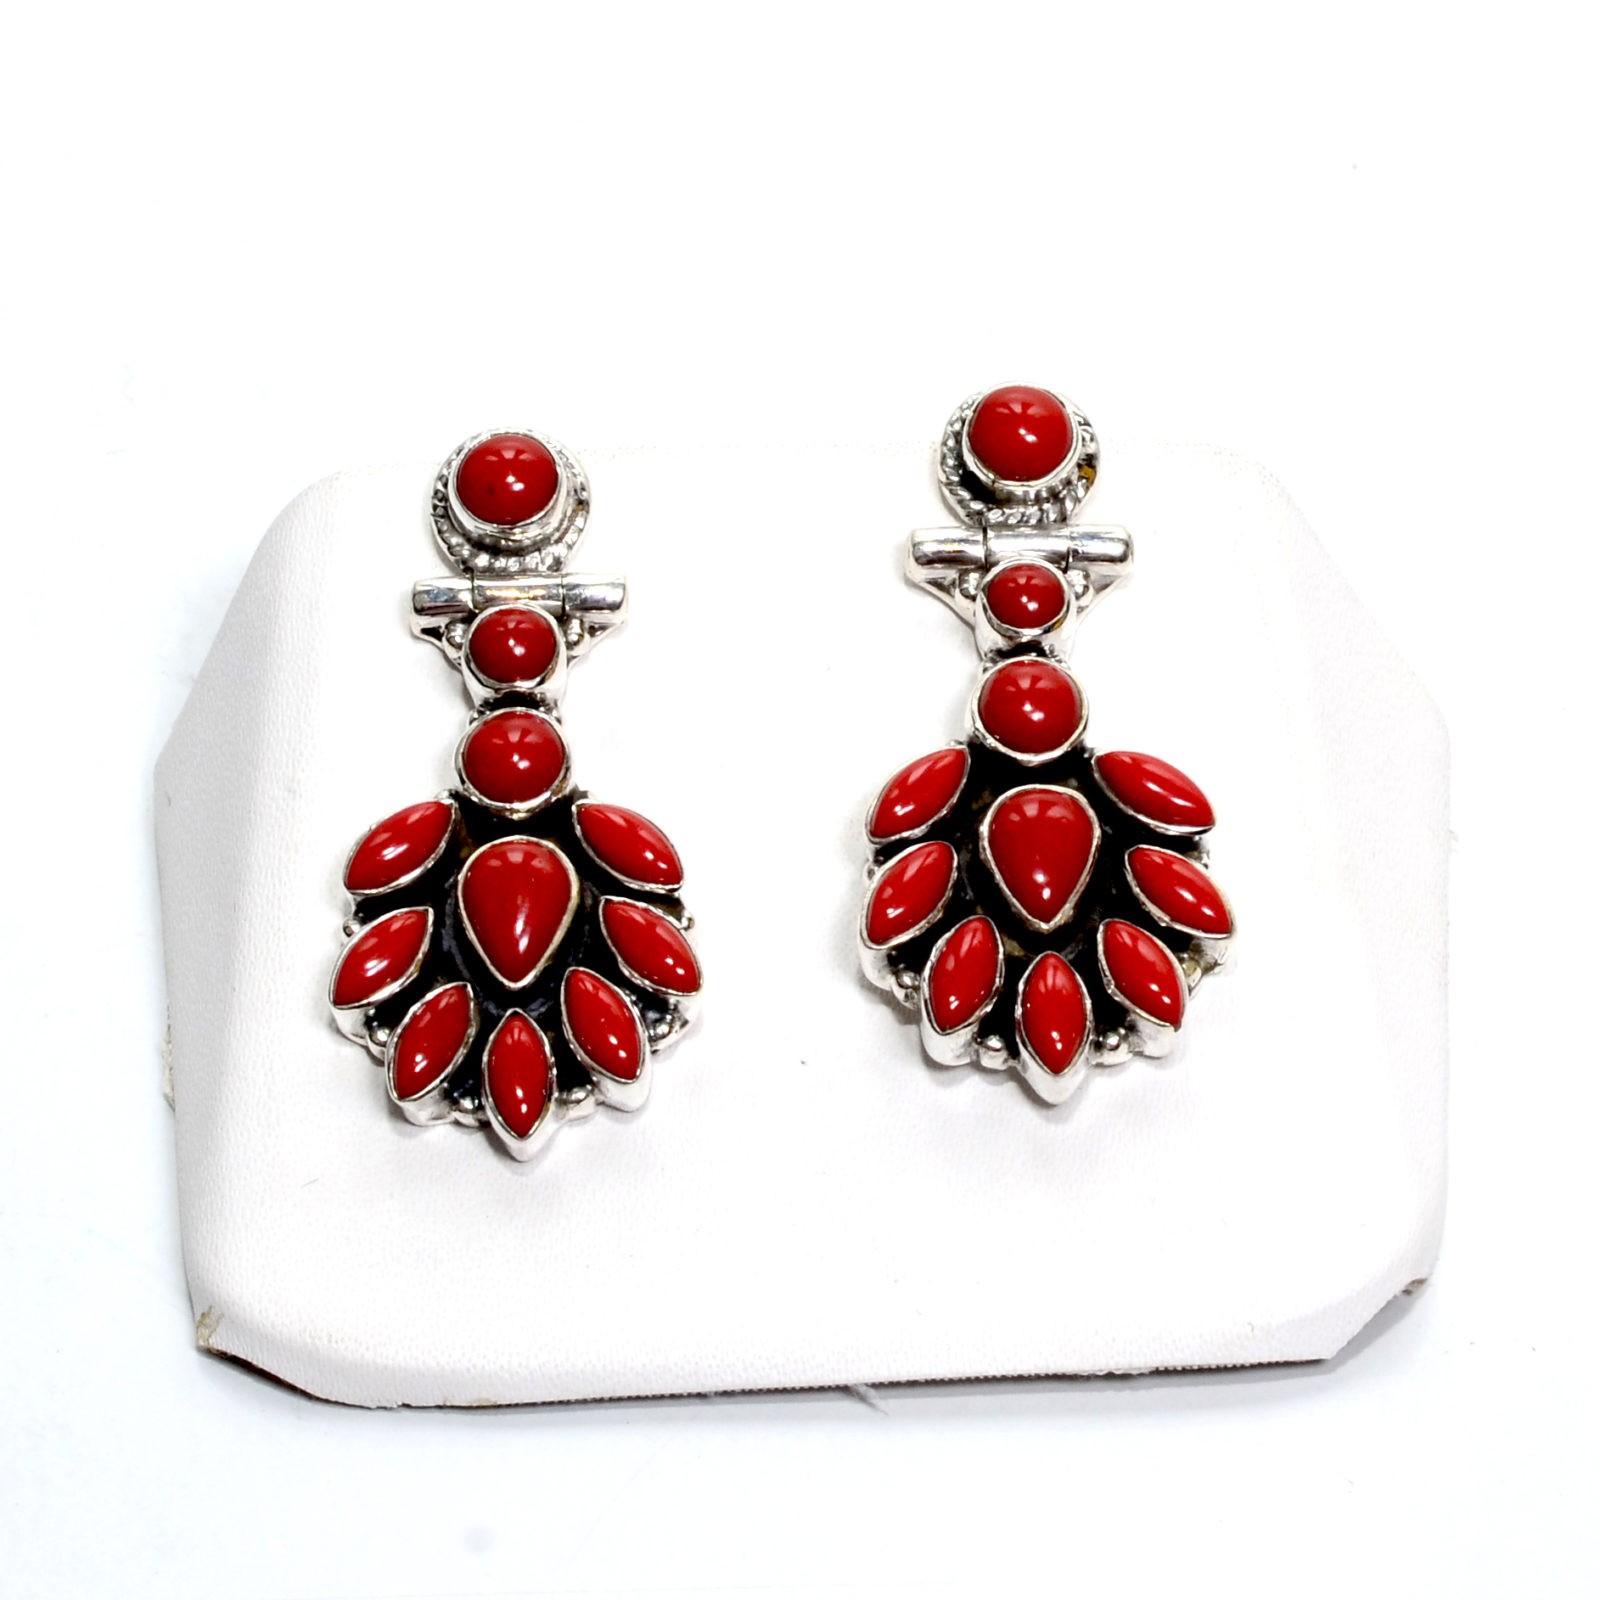 Buy Dugran By Dugristyle Red Chand Bali Earrings Online At Best Price @  Tata CLiQ